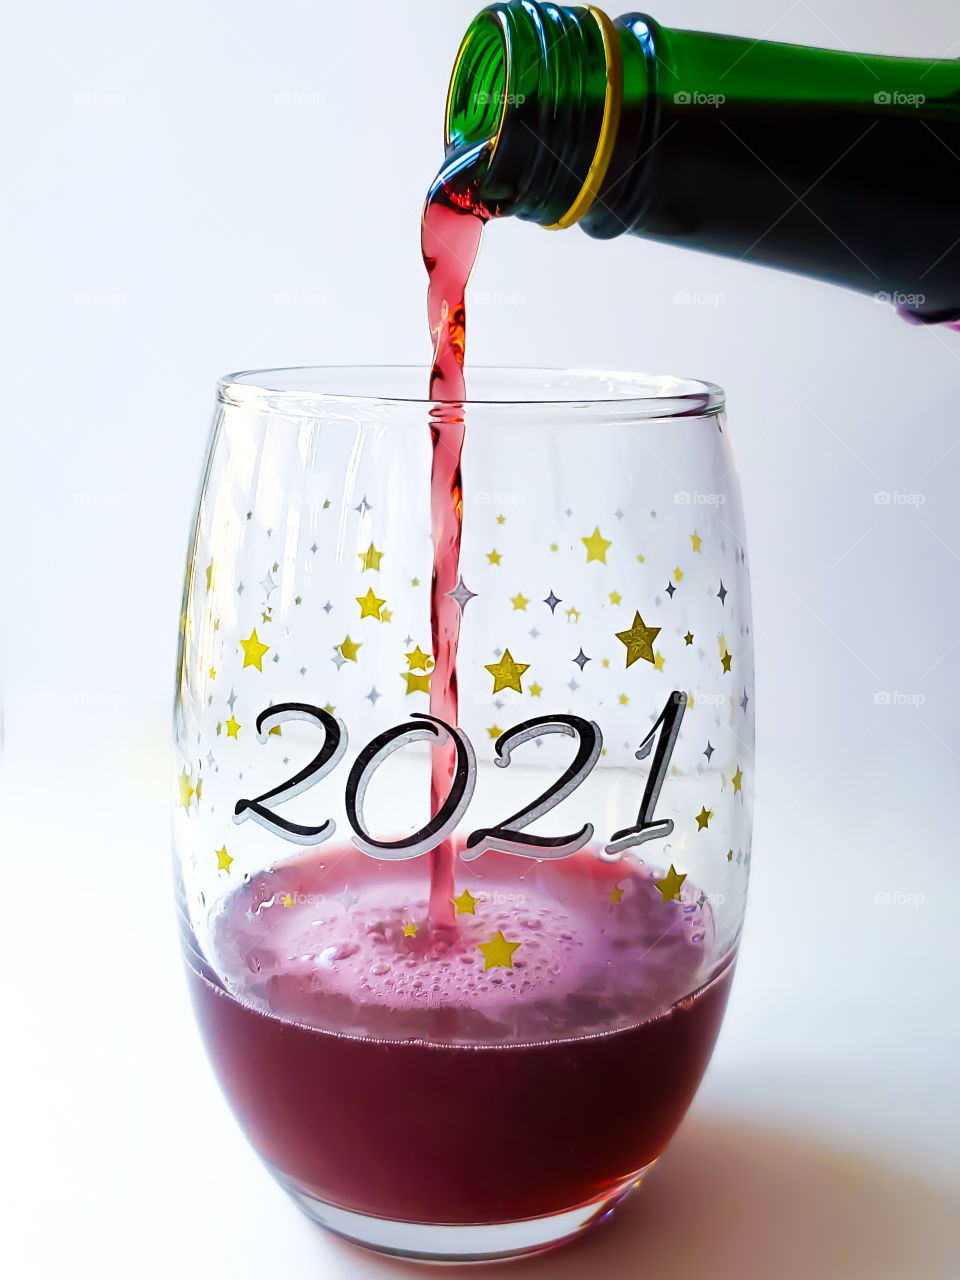 Pouring to a new year and saying goodbye to a 2020. Sparkling red wine being poured into a 2021 wine glass with a white background!.